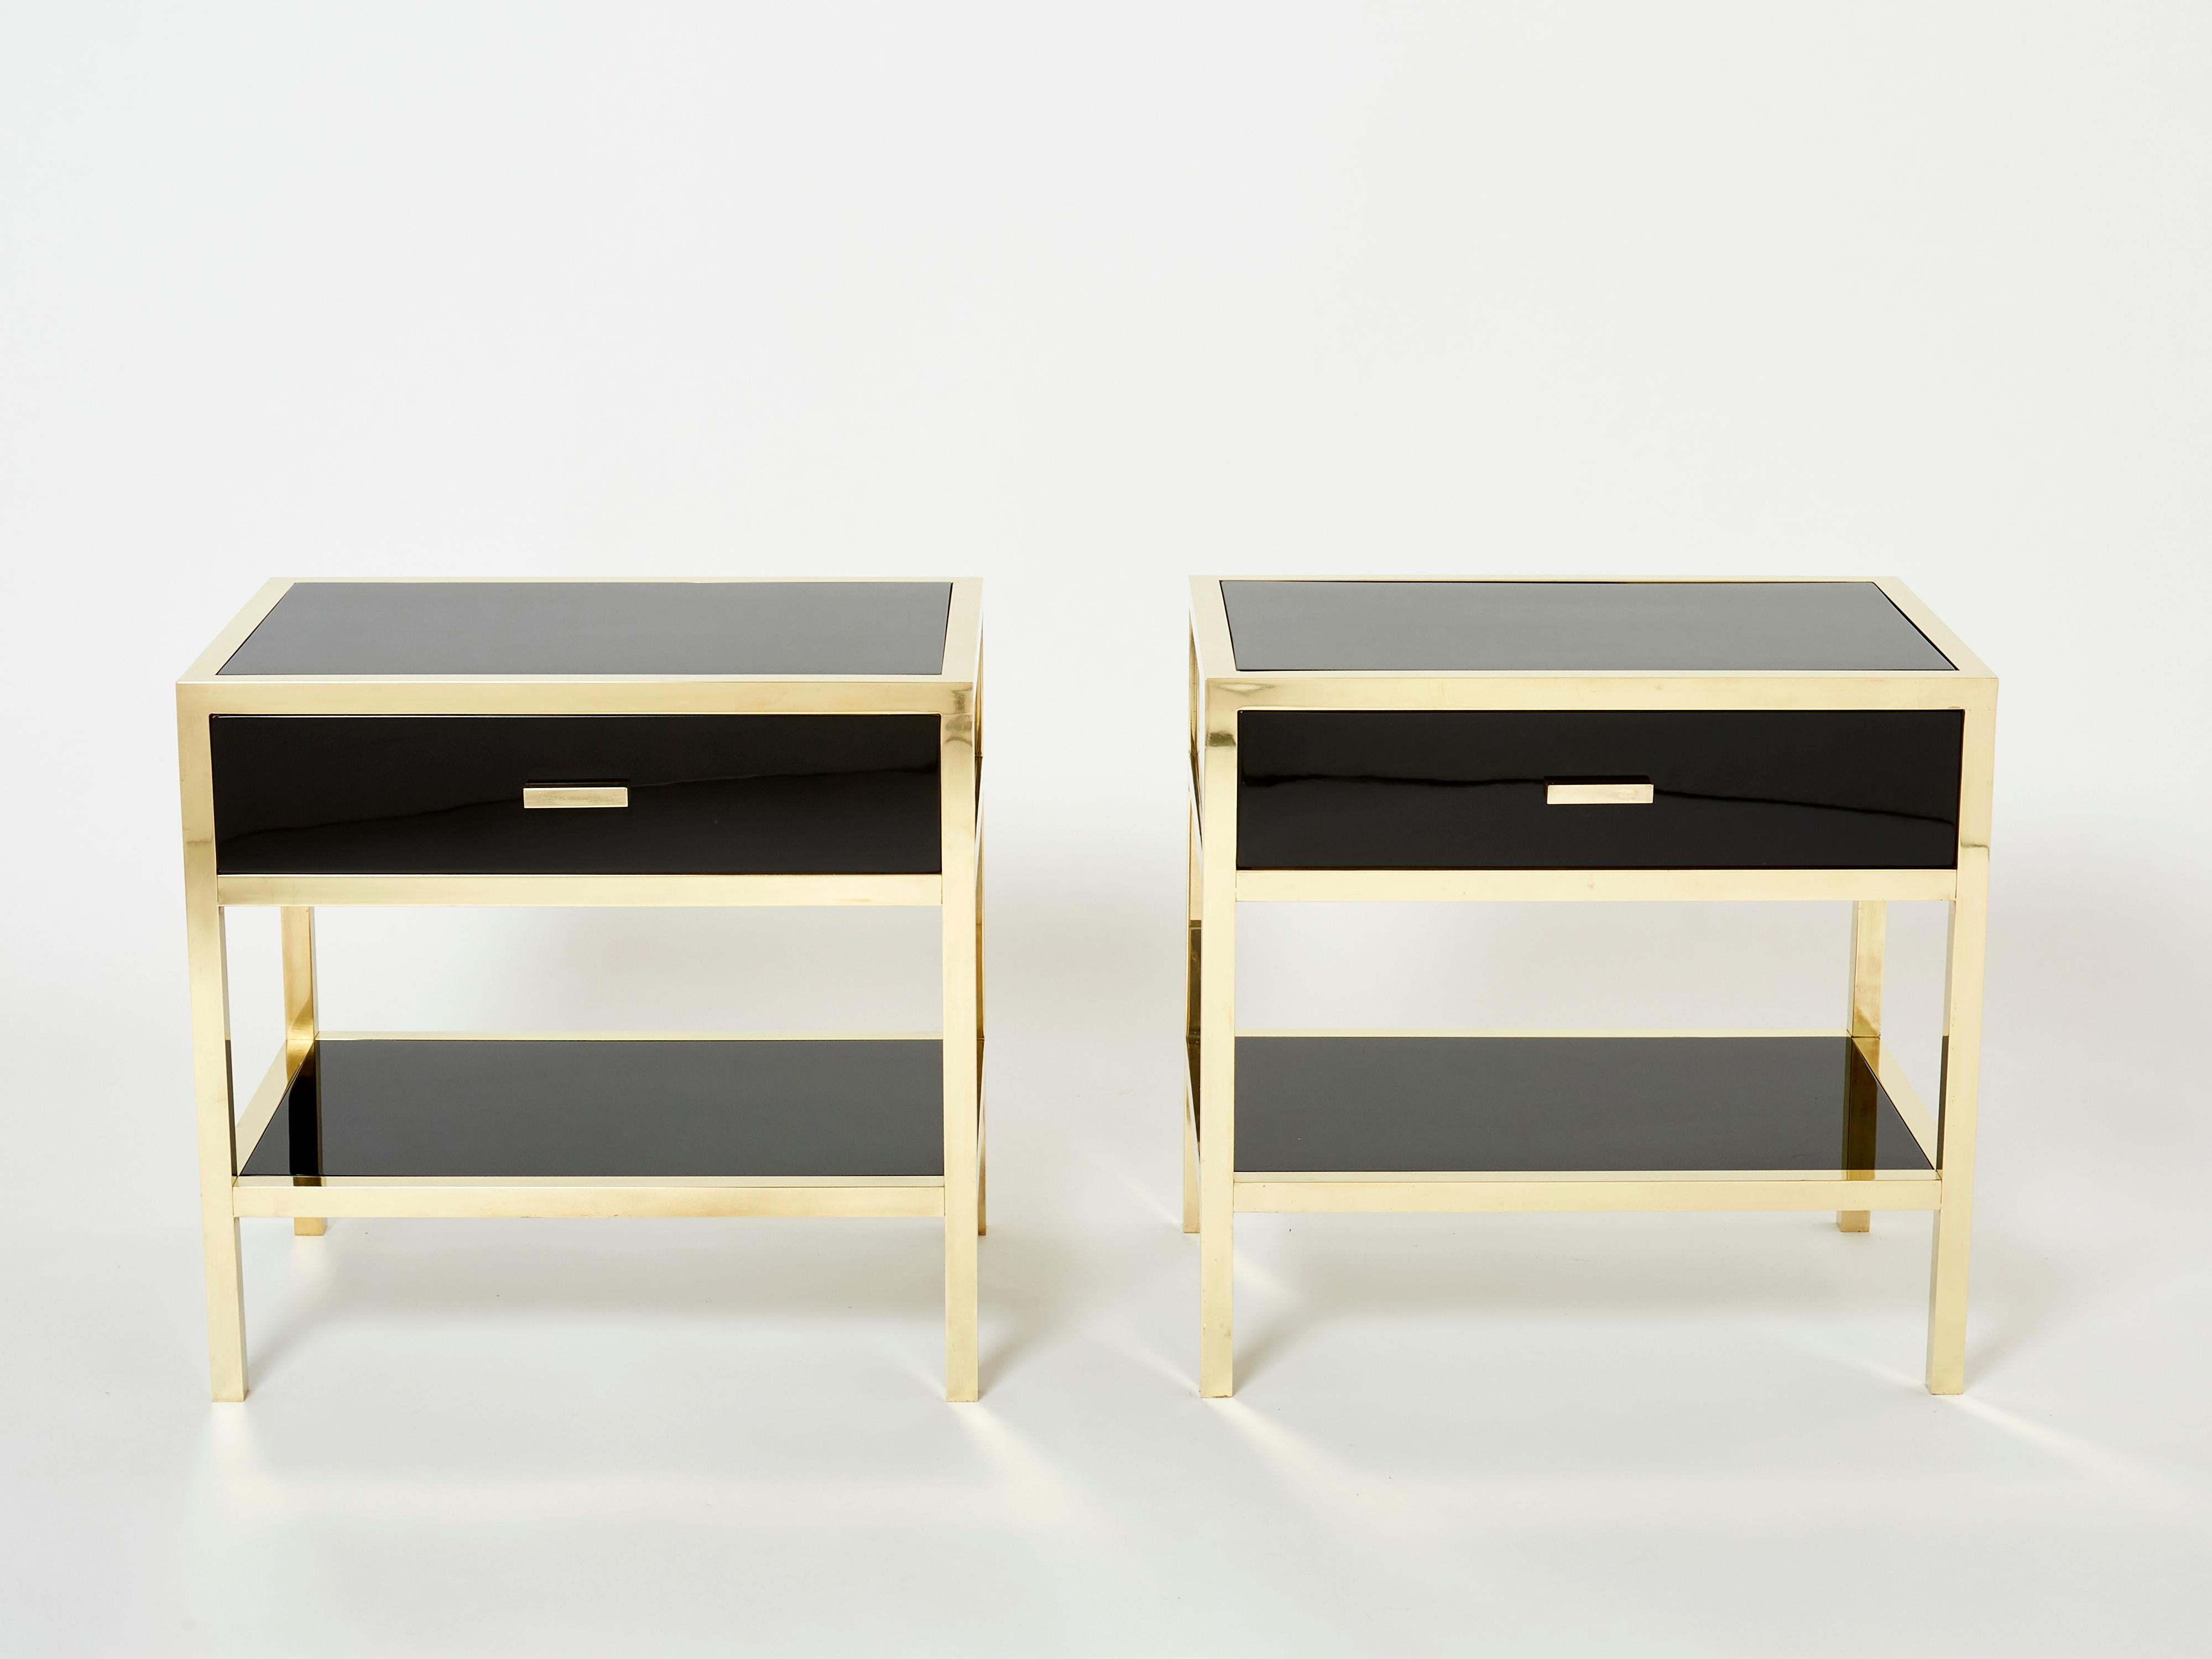 This rare pair of French midcentury single drawer black lacquered nightstands or end tables would be stunning in any room. Designed by Michel Pignères in France in the late 1970s, the shiny black lacquer paired with polished brass structure and